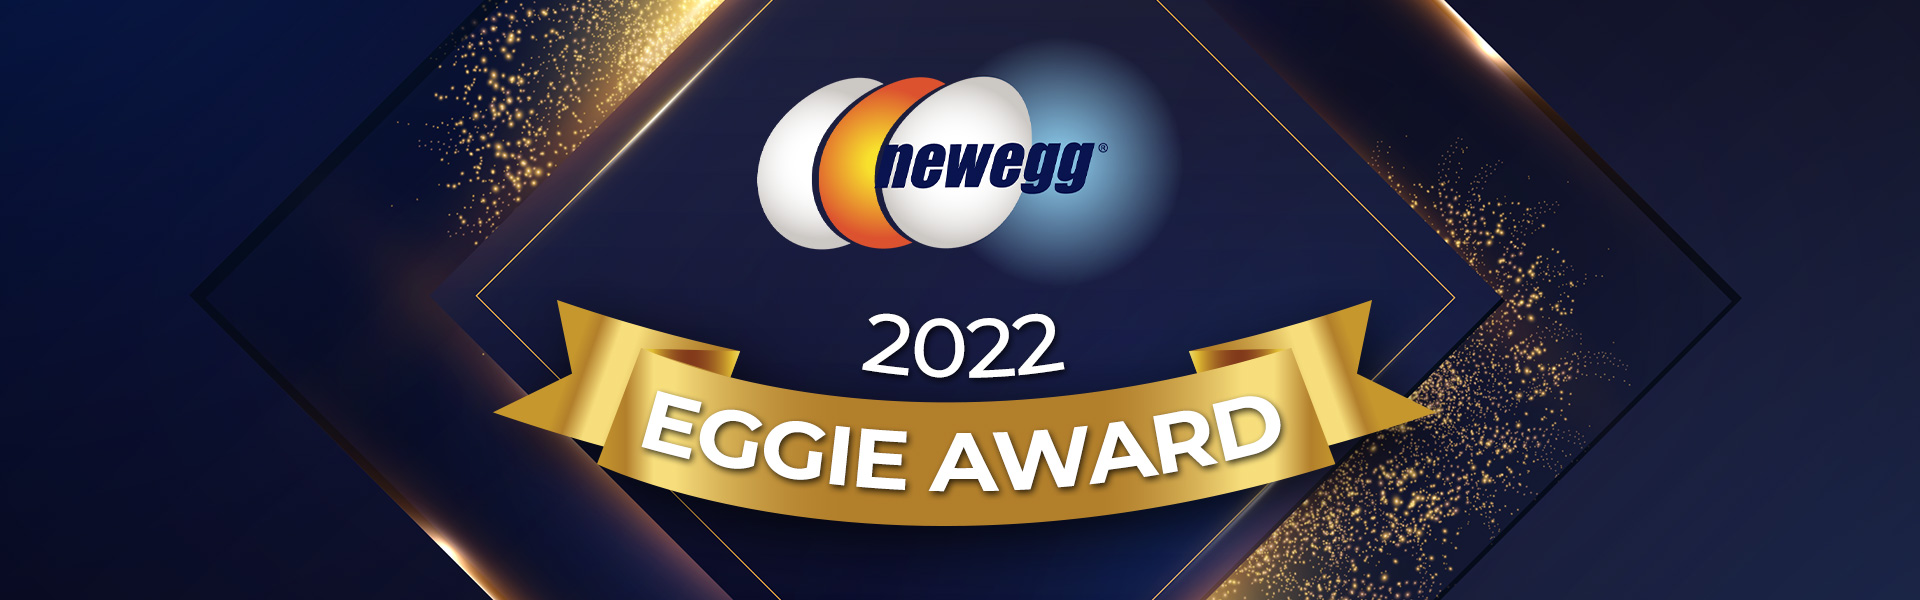 Newegg’s Annual Eggie Awards Celebrate the Contributions of its Top Partners in 2021